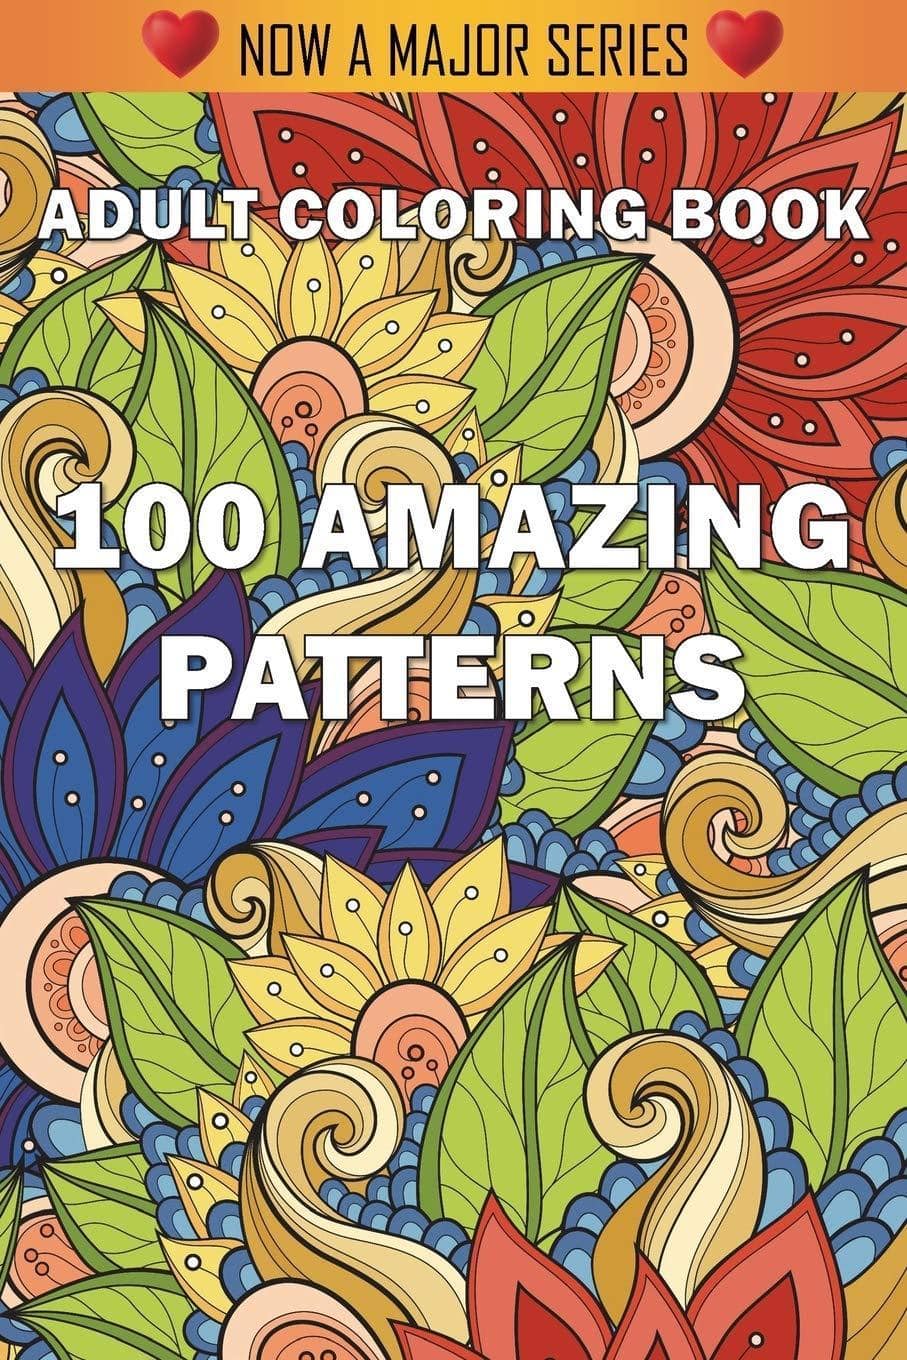 100 Amazing Patterns: An Adult Coloring Book with Fun, Easy, and - SureShot Books Publishing LLC